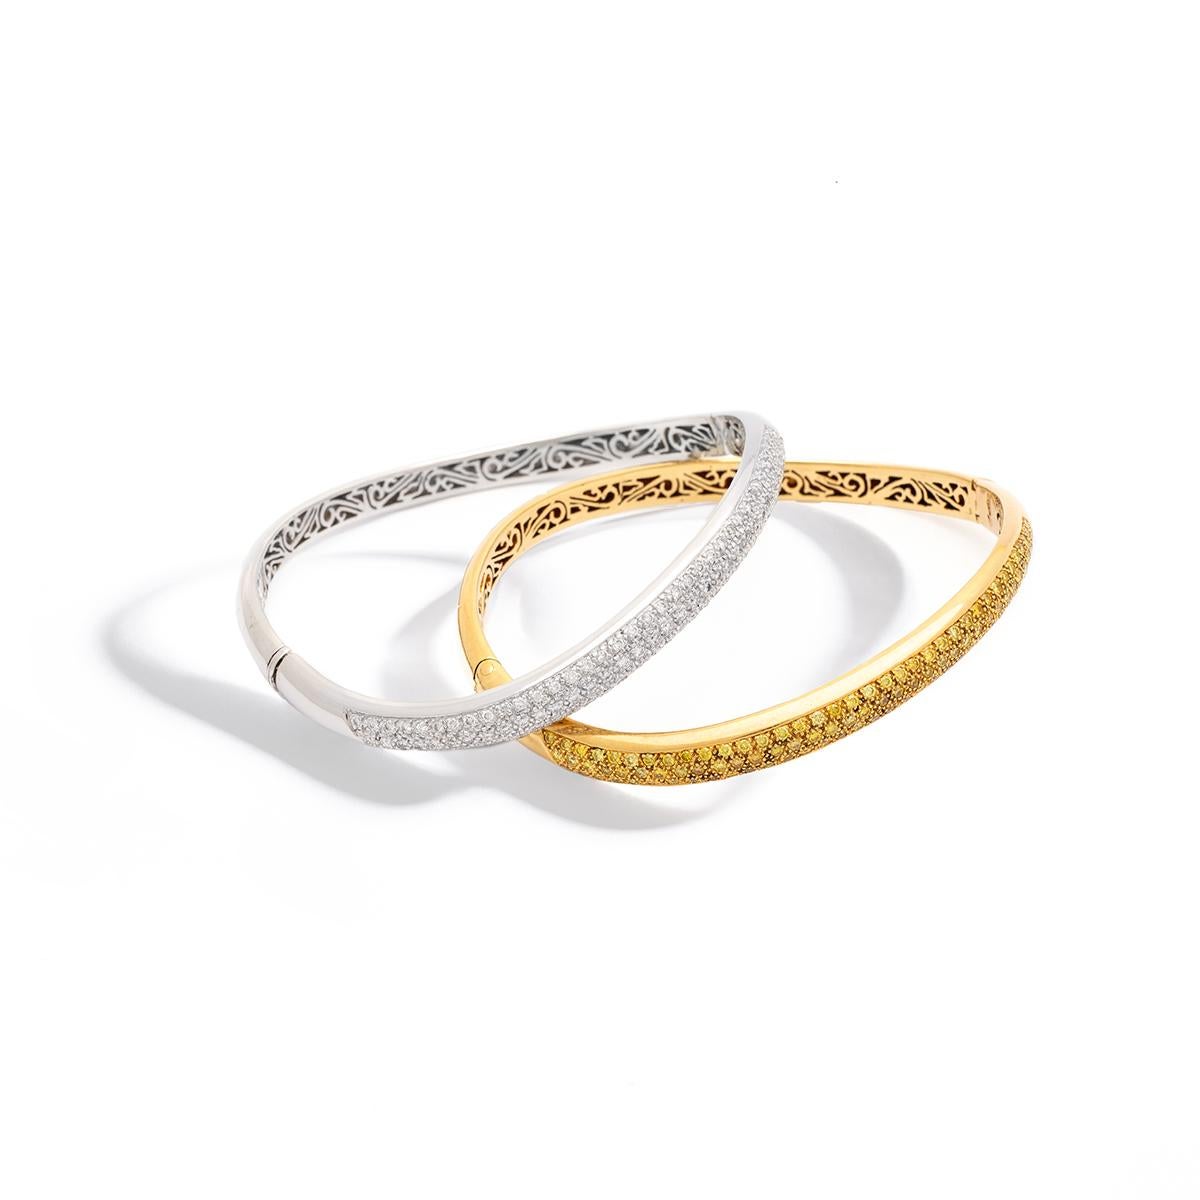 Bracelets pair white and yellow gold respectively diamonds 2.20 carats.